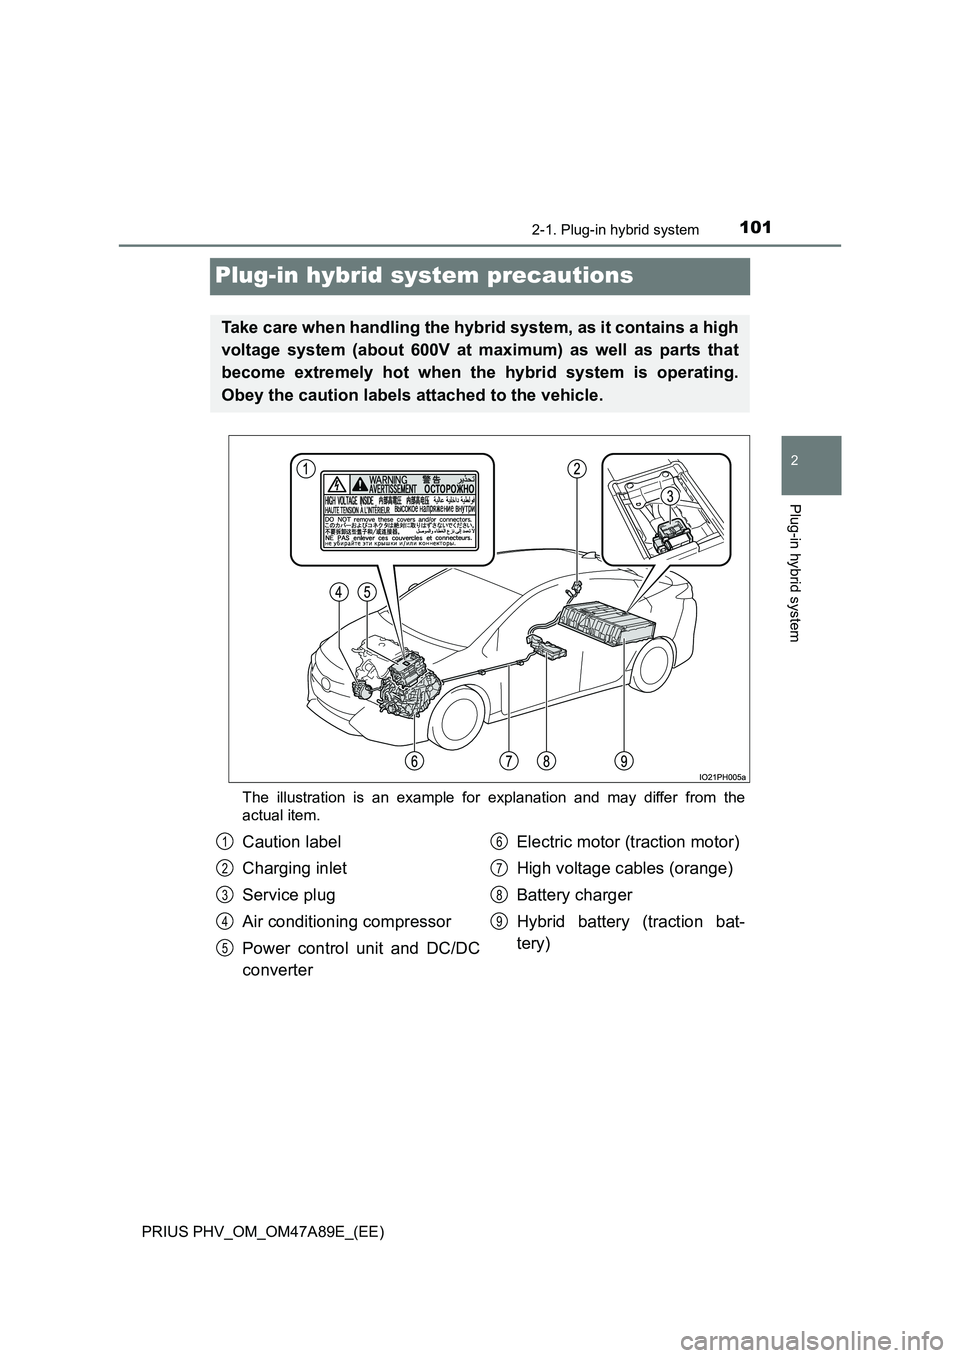 TOYOTA PRIUS PLUG-IN HYBRID 2016  Owners Manual 101
2
2-1. Plug-in hybrid system
Plug-in hybrid system
PRIUS PHV_OM_OM47A89E_(EE)
Plug-in hybrid system precautions
The illustration is an example for explanation and may differ from the
actual item.
